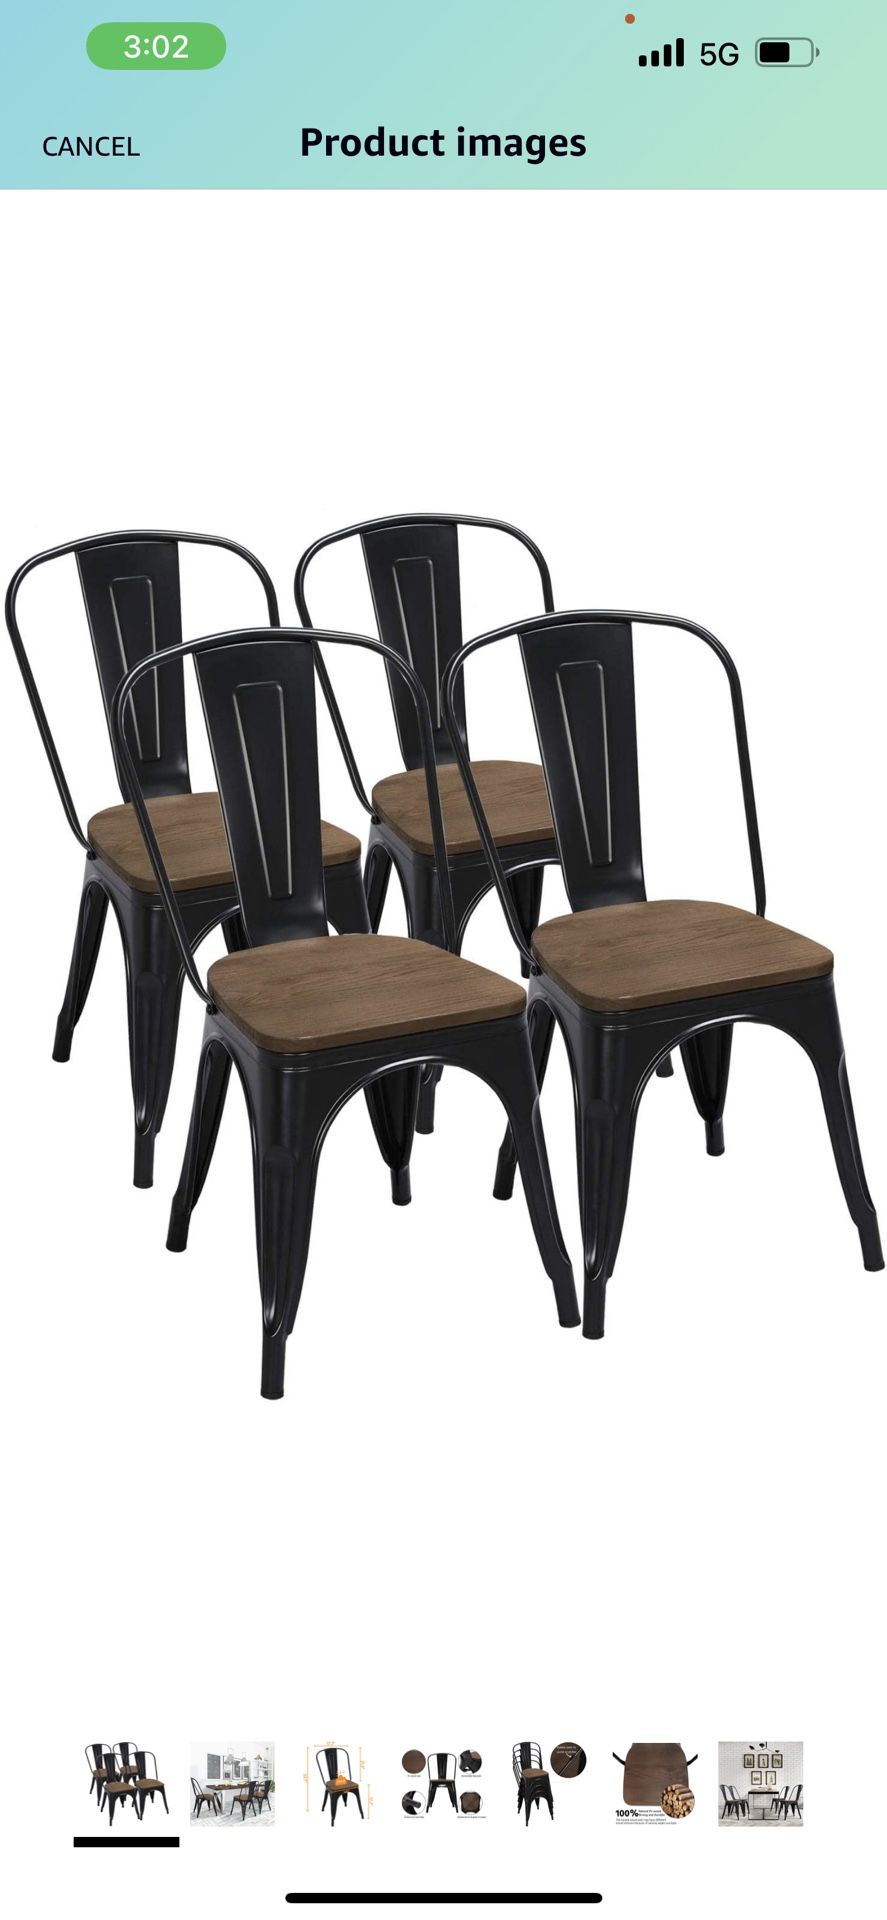 18 Inch Classic Iron Metal Dinning Chair with Wood Top/Seat Indoor-Outdoor Use Chic Dining Bistro Cafe Side Barstool Bar Chair Coffee Chair Set of 4 B